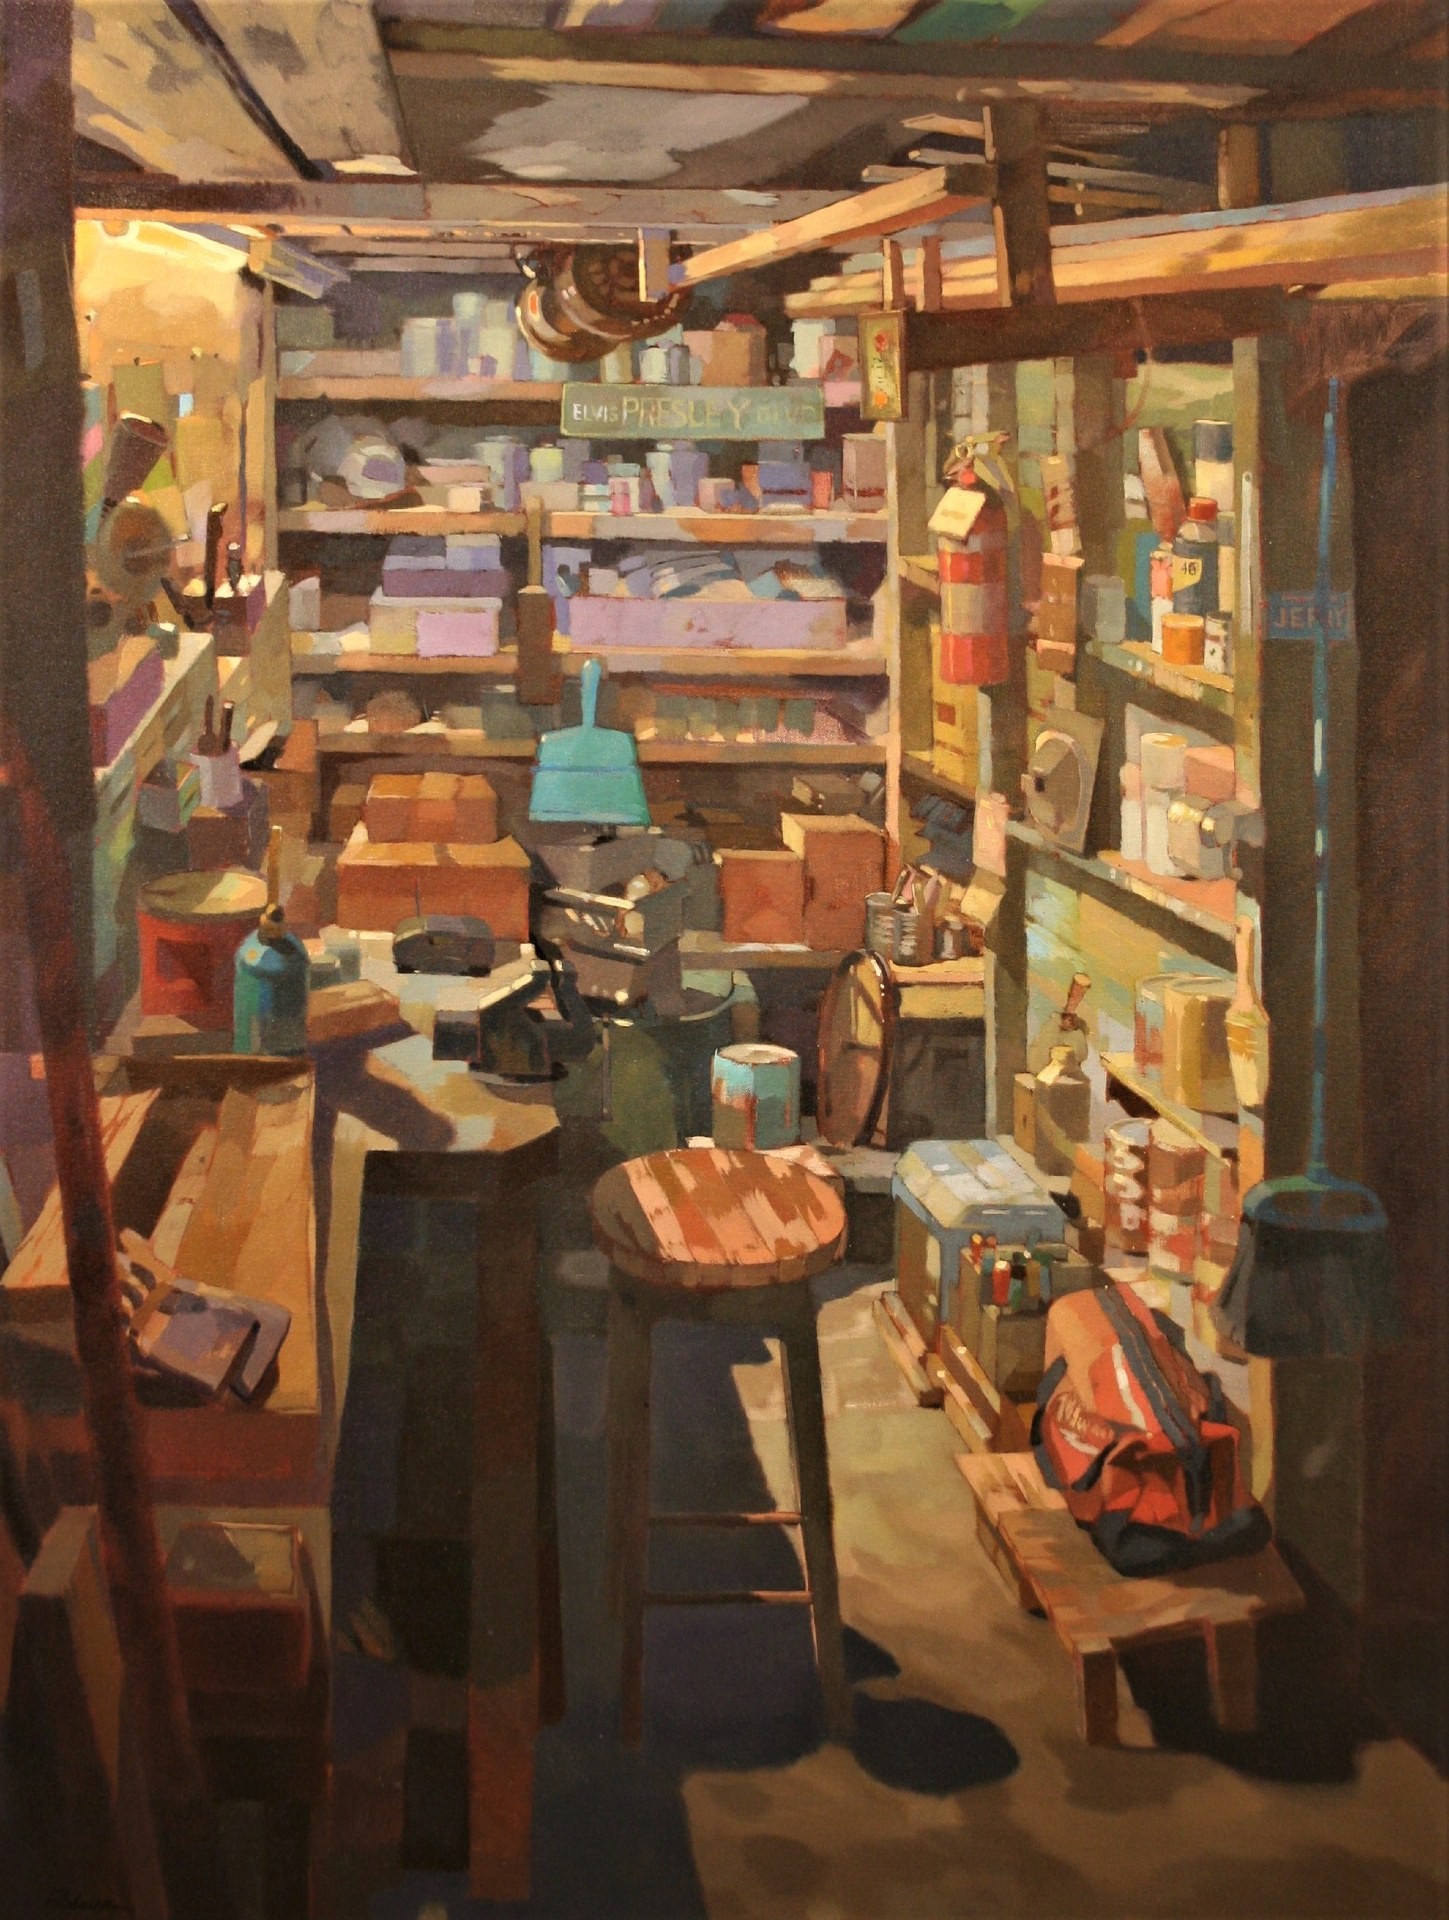 12th Annual PleinAir Salon Art Competition Annual Awards Semi-Finalist Bob Shackles Remembering Gerry Indoor Workshop Oil Painting